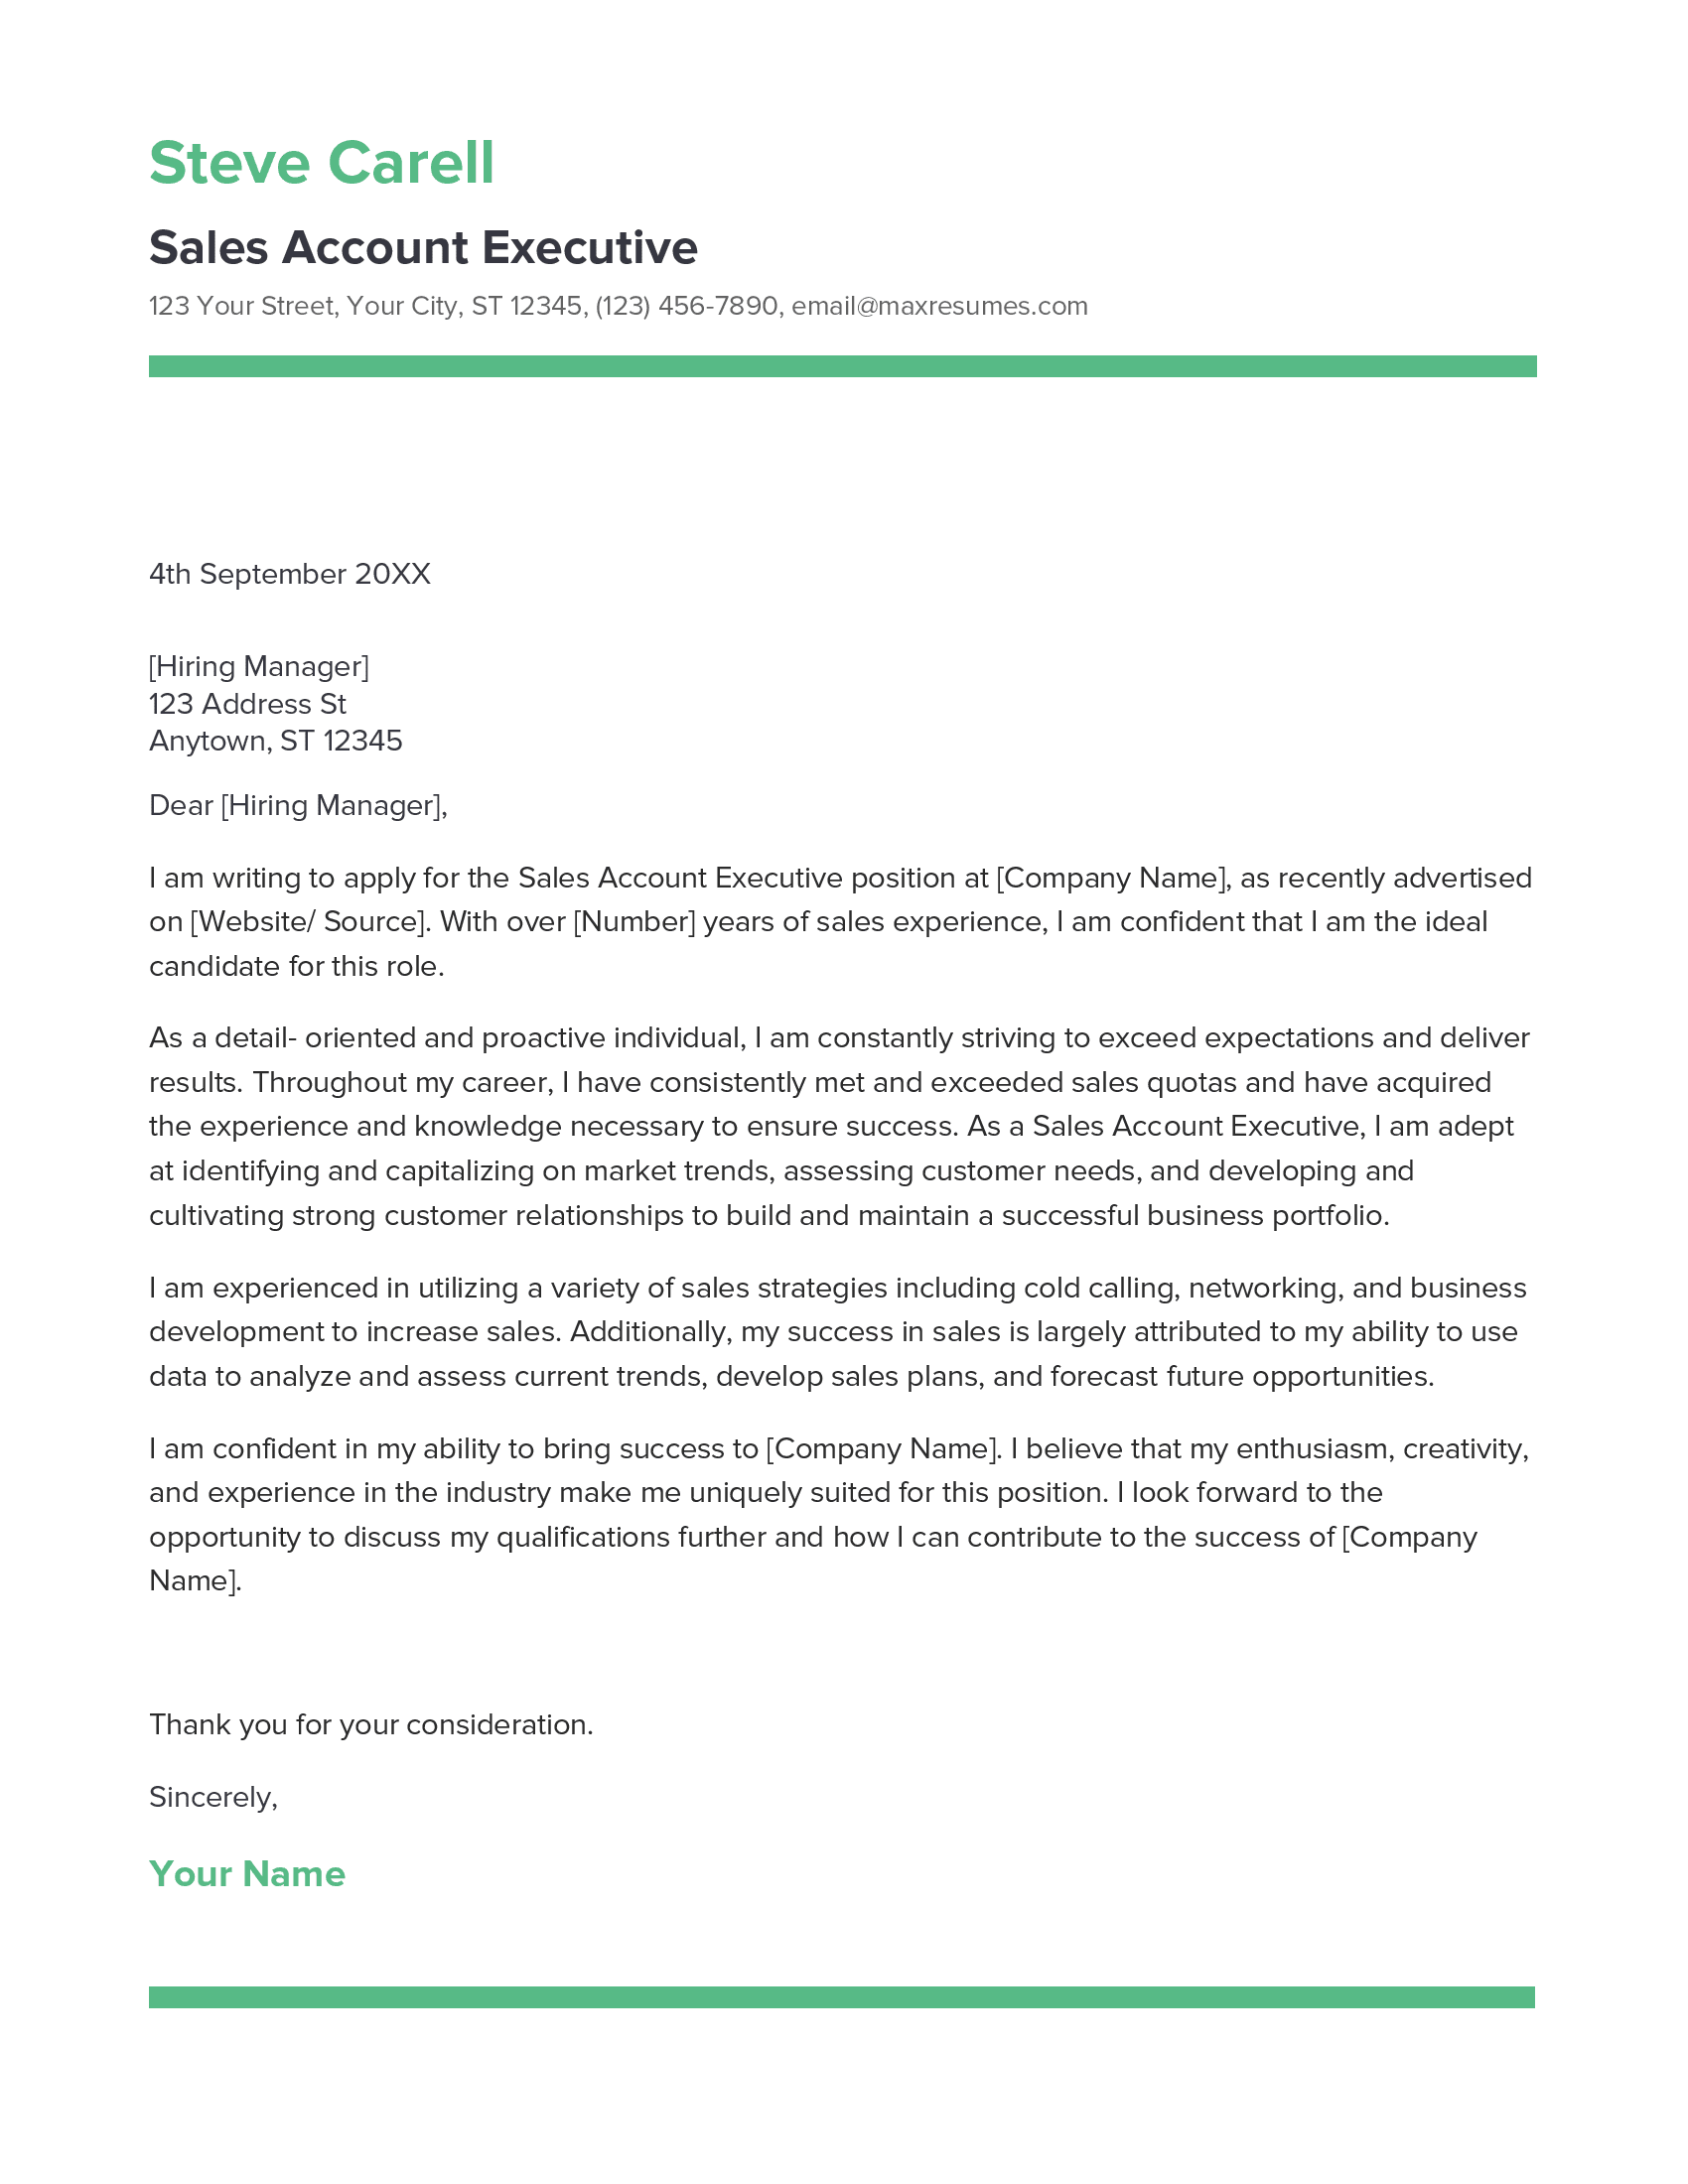 Sales Account Executive Cover Letter Example